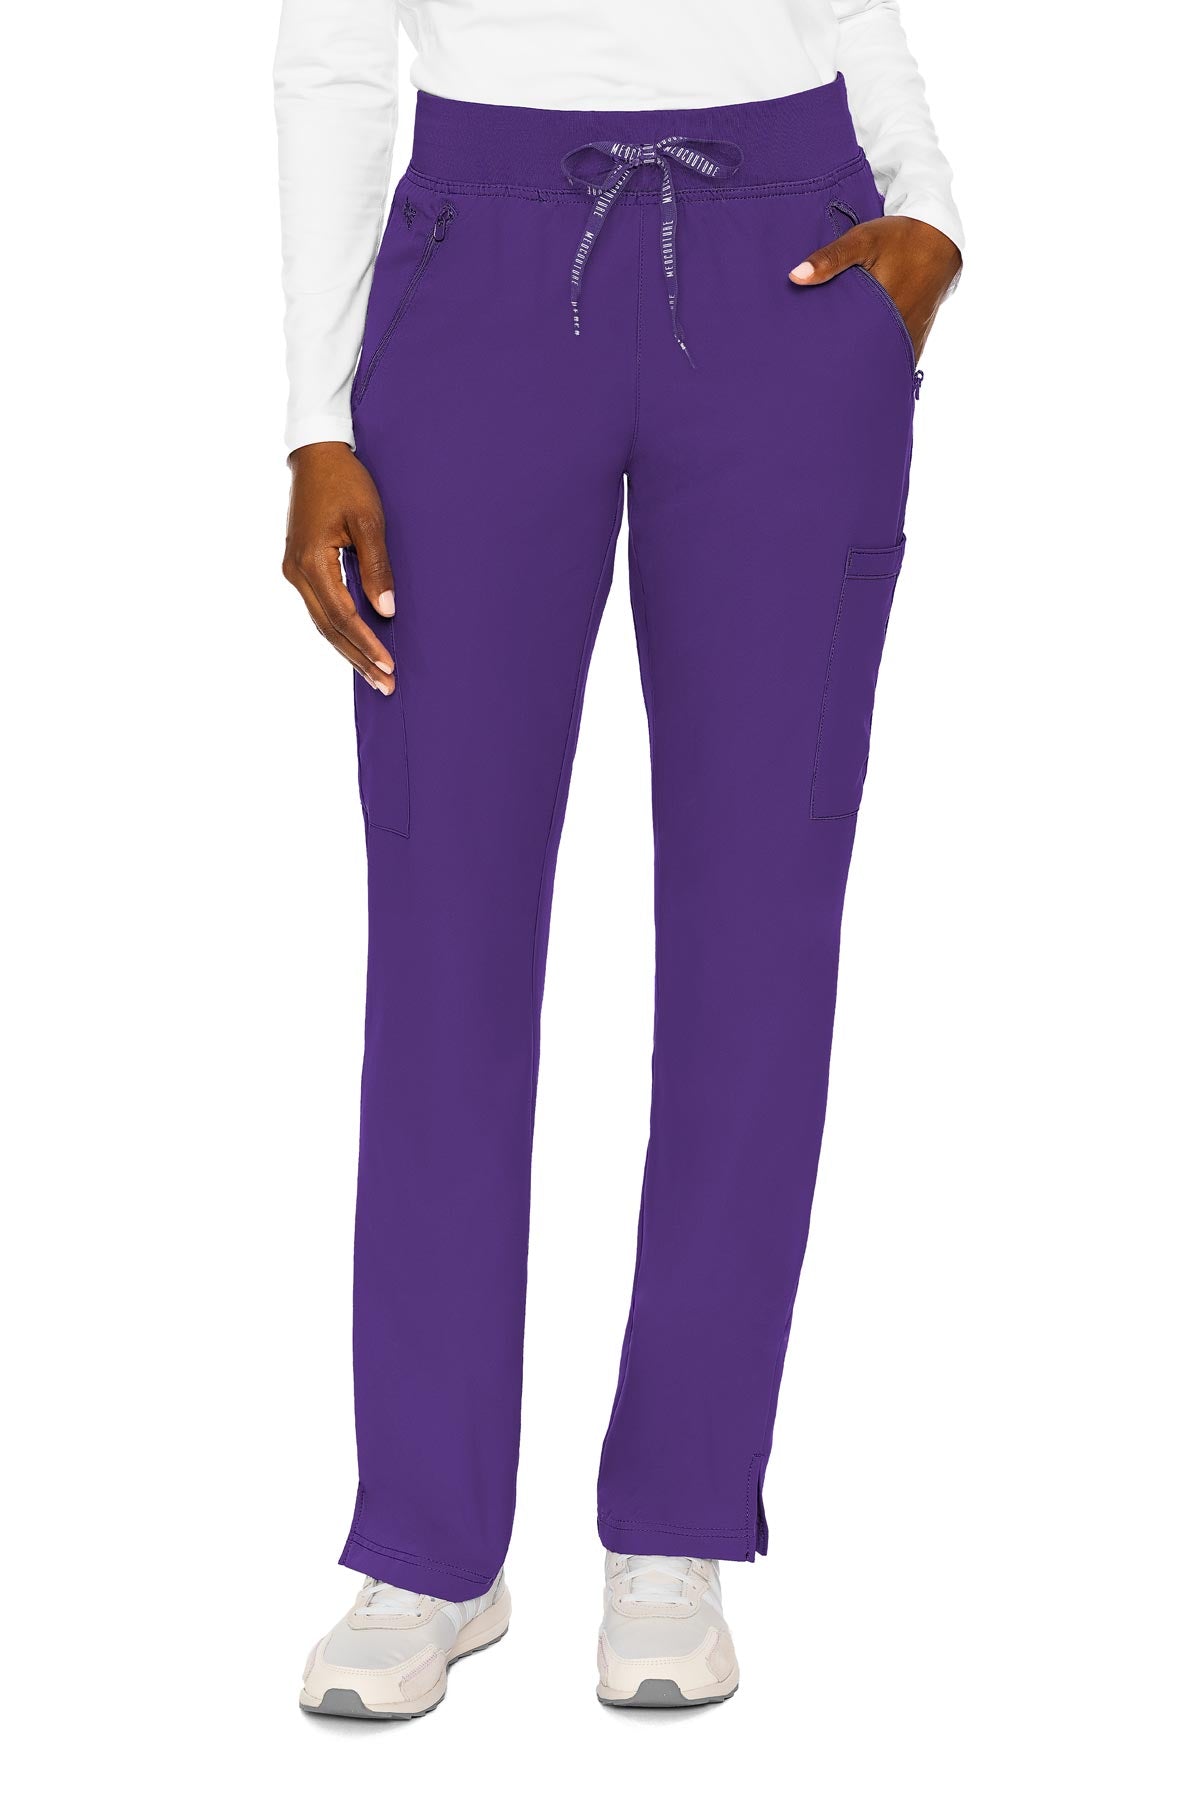 Med Couture Grape PANT